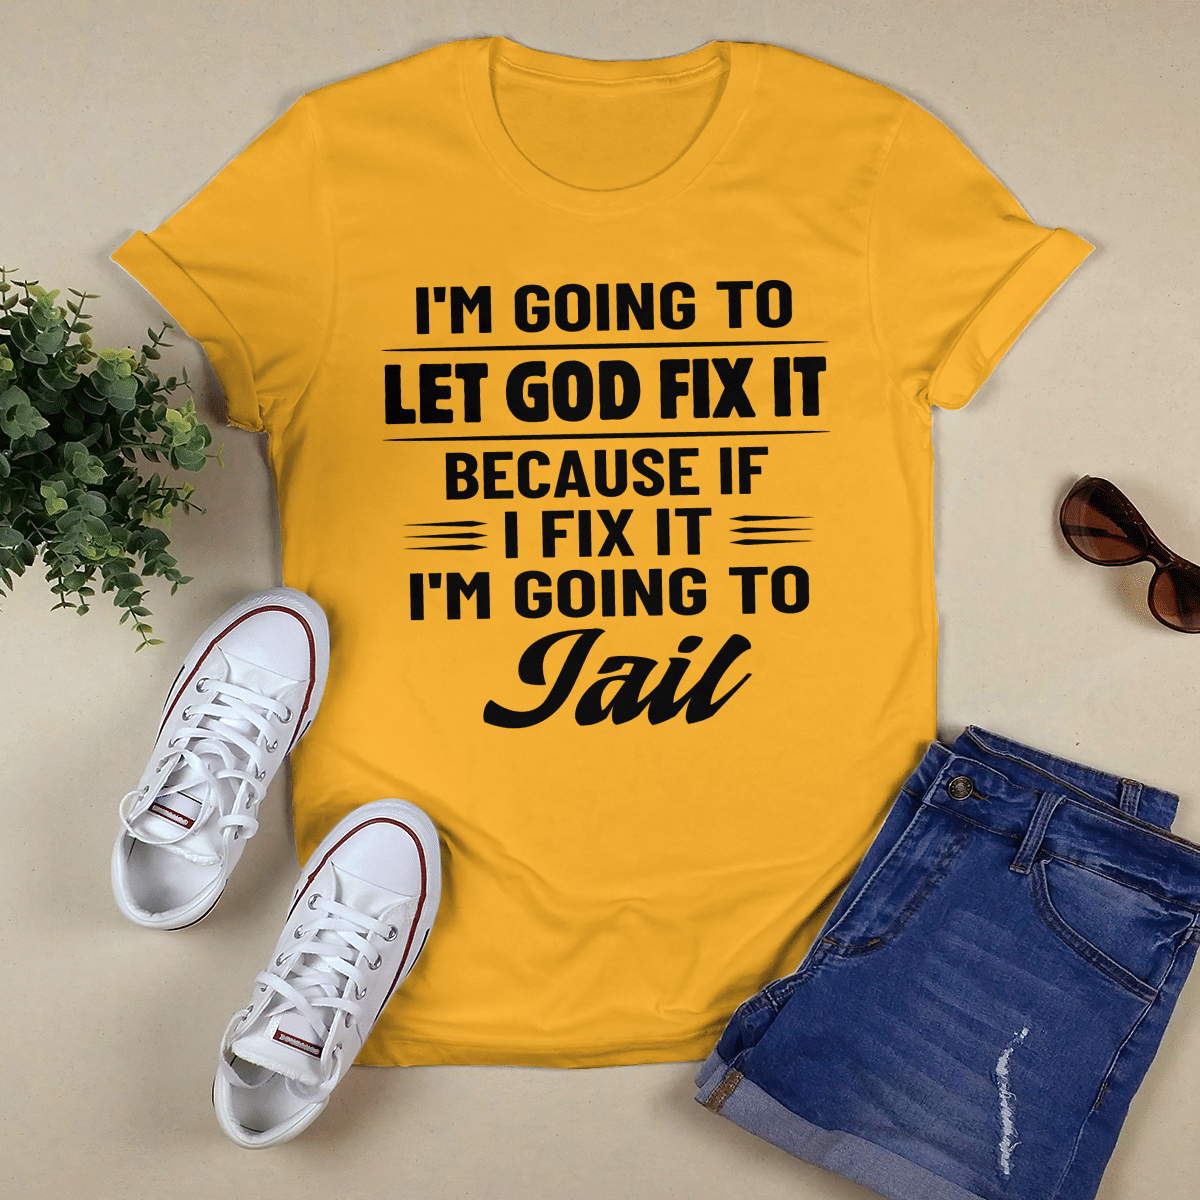 I_m Going To Let God Fix It shirt